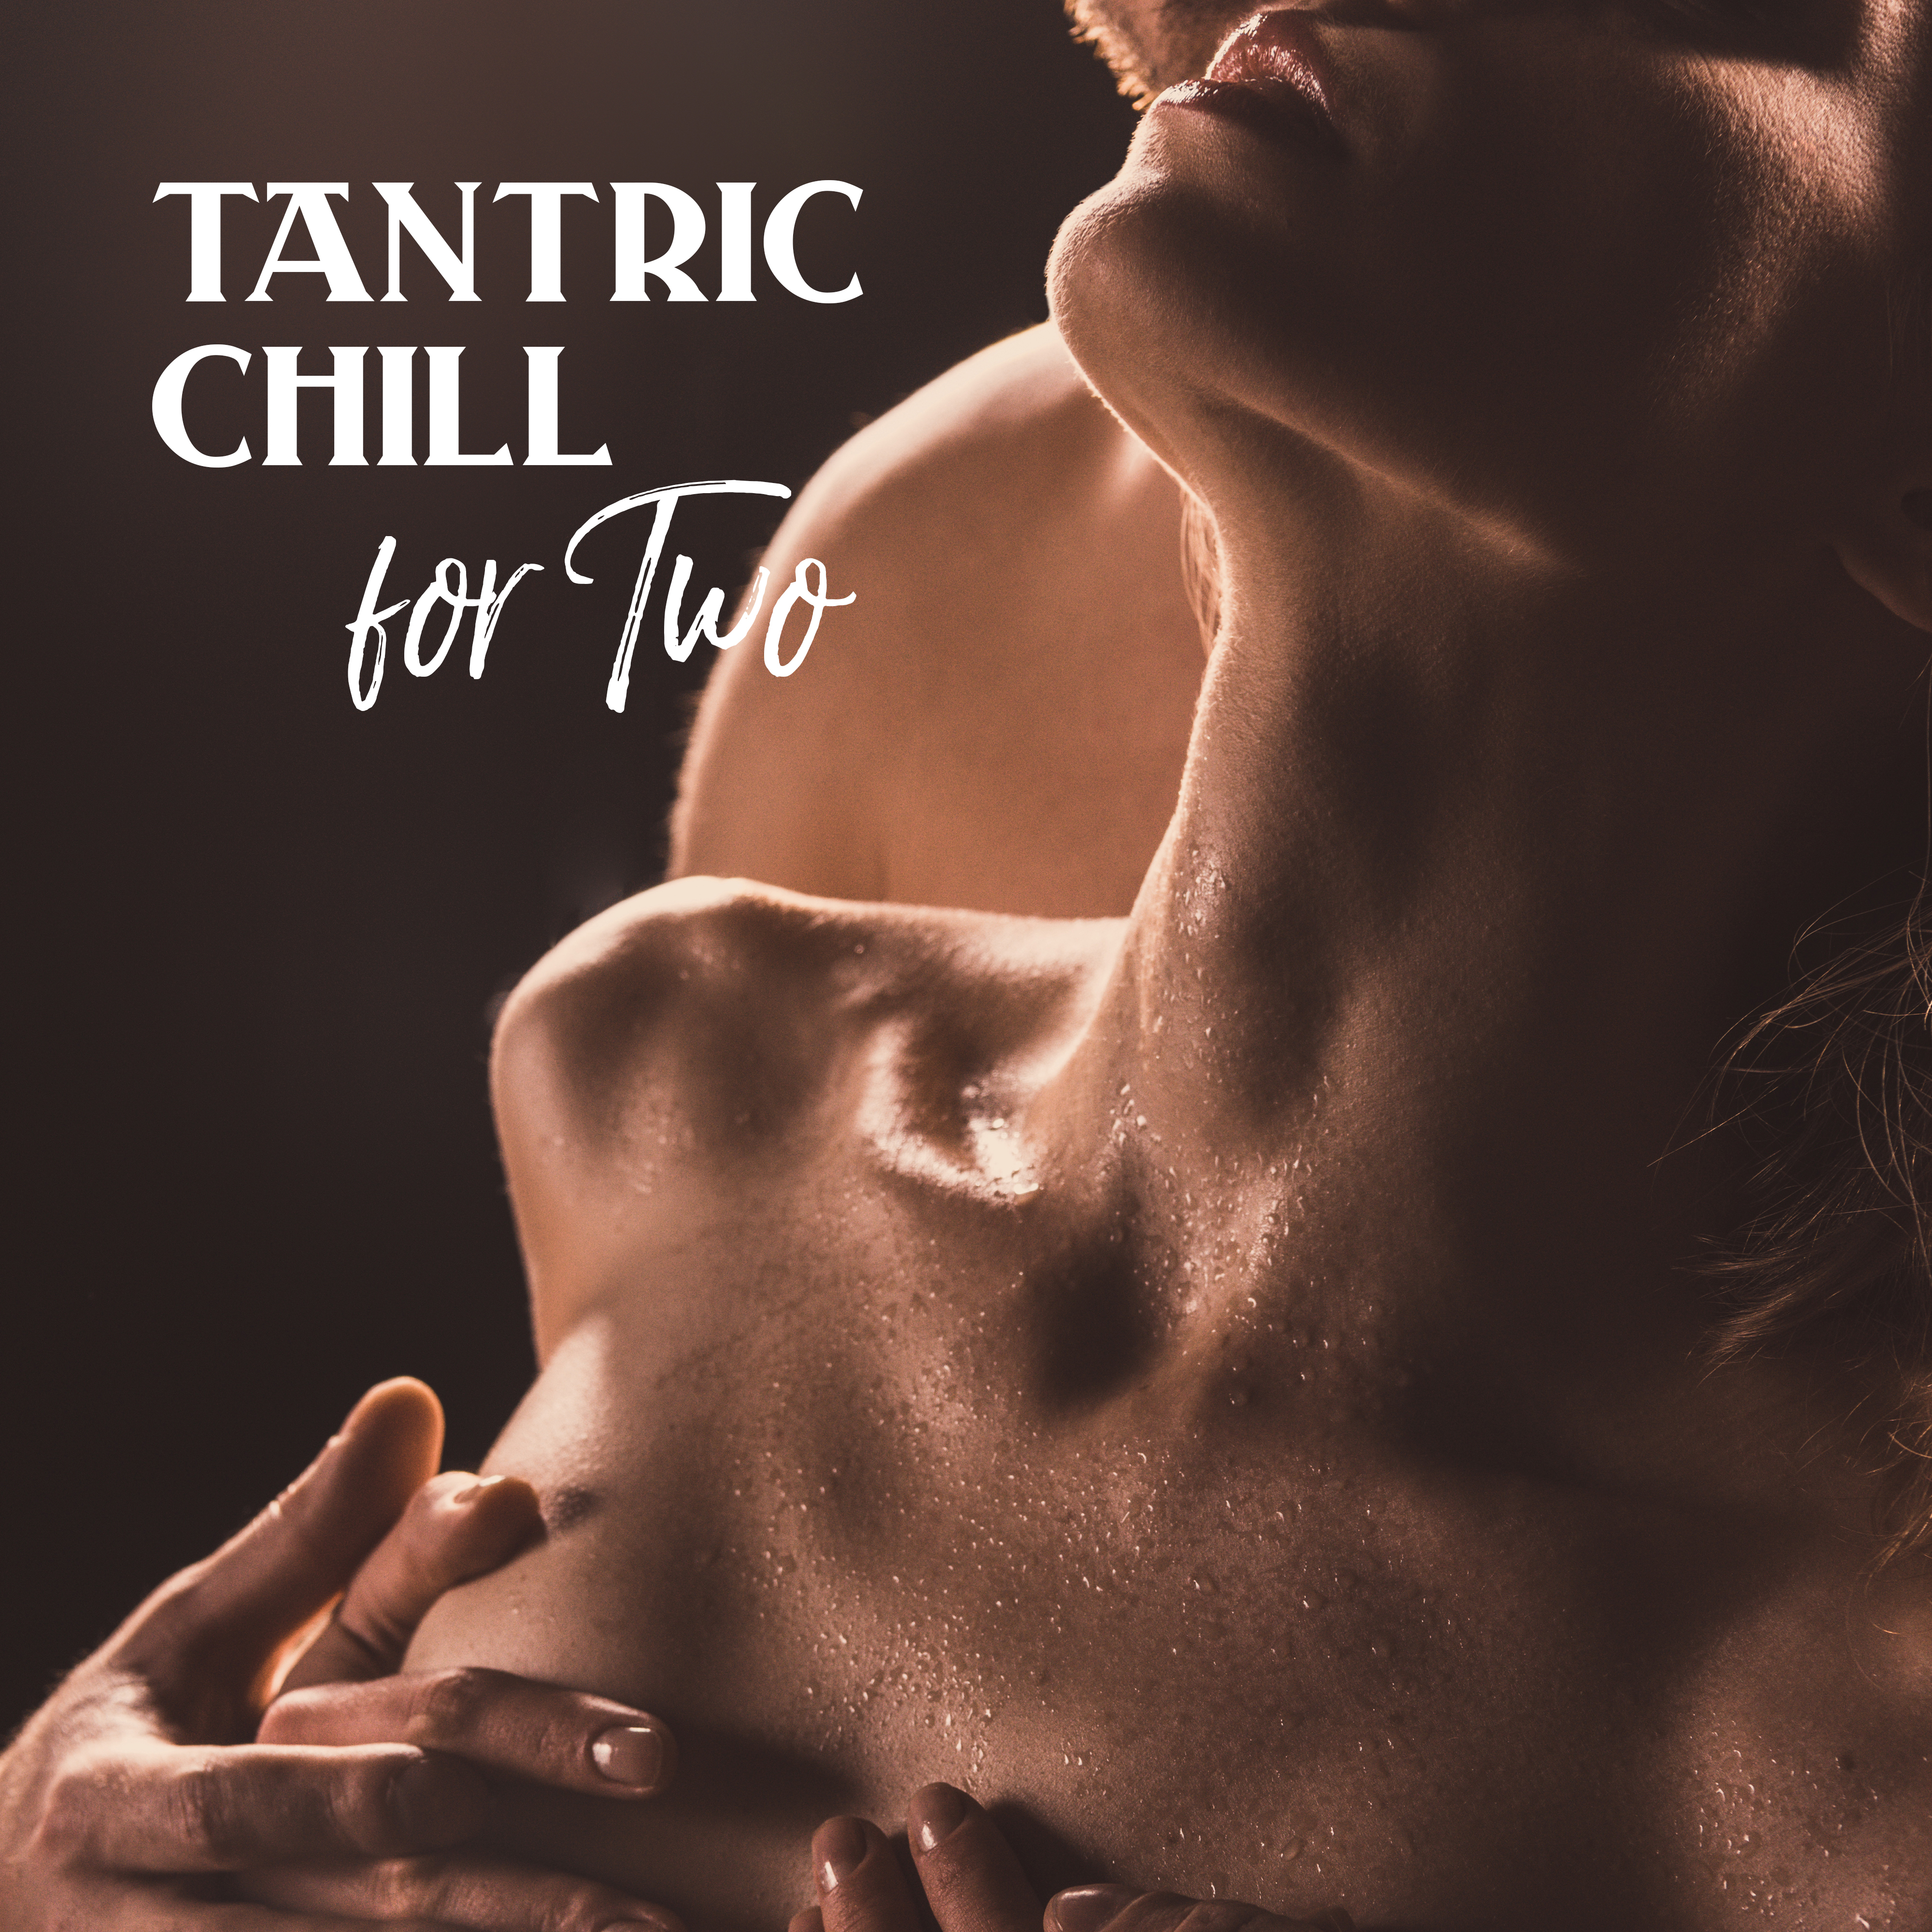 Tantric Chill for Two